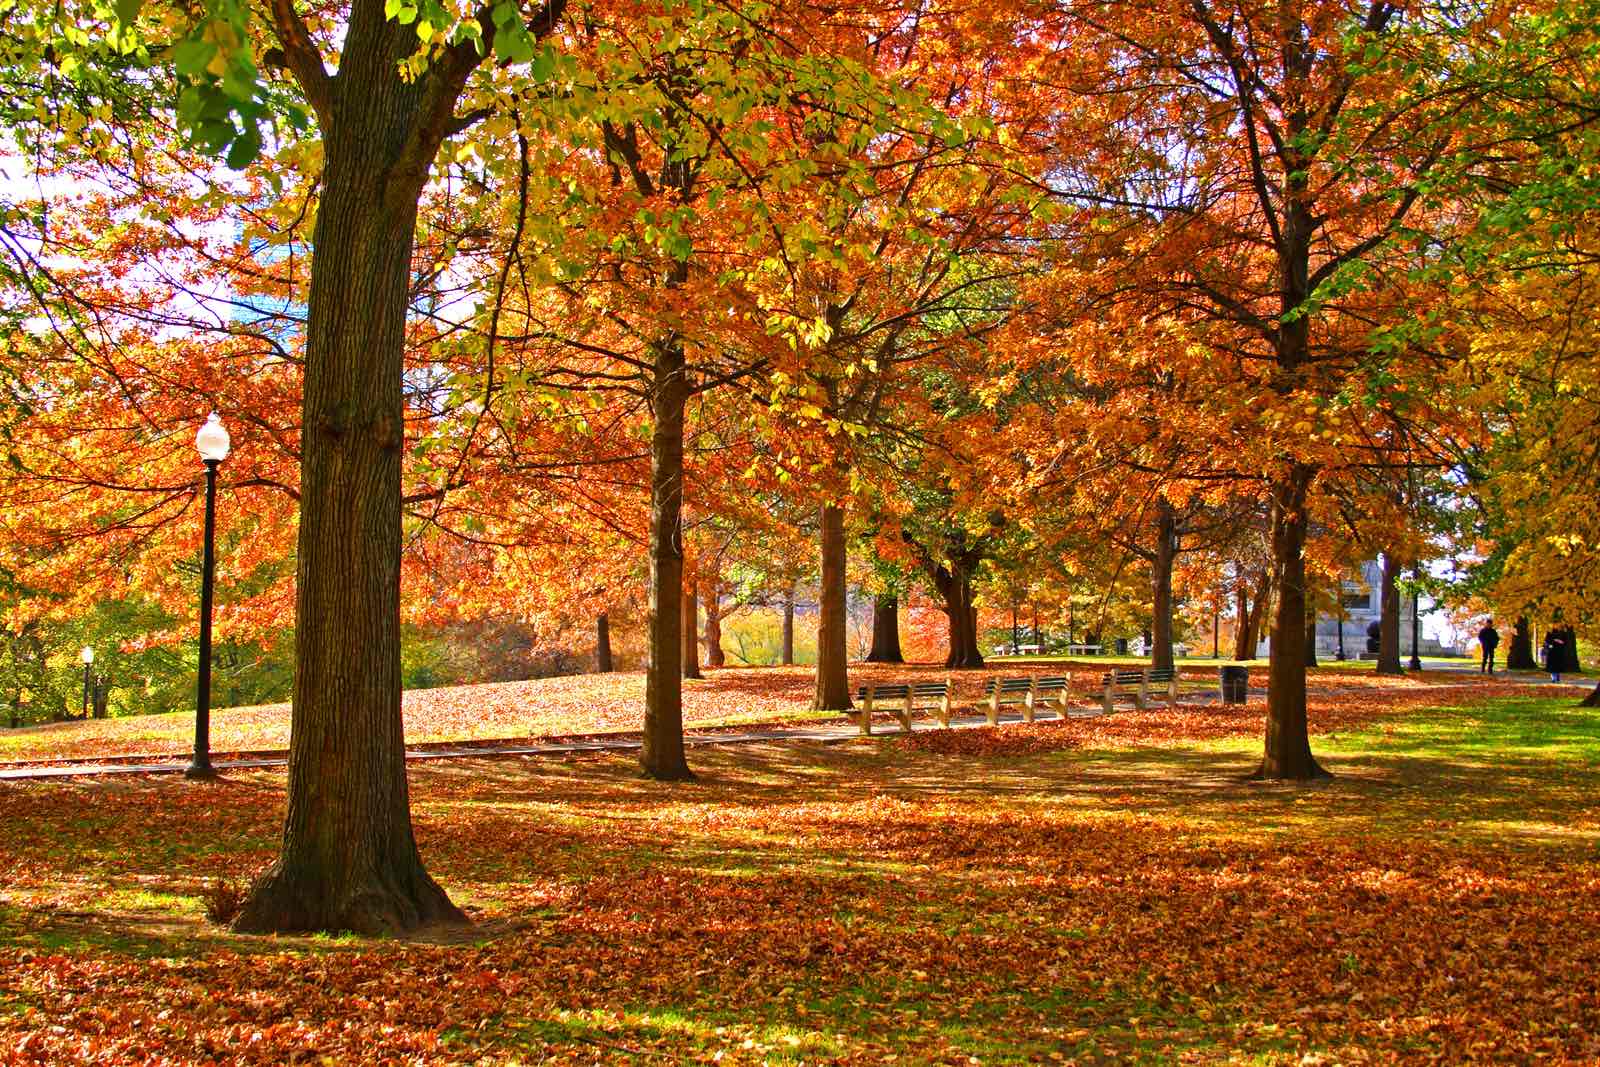 Autumn at One Greenway: Hot Spots for Fall Foliage